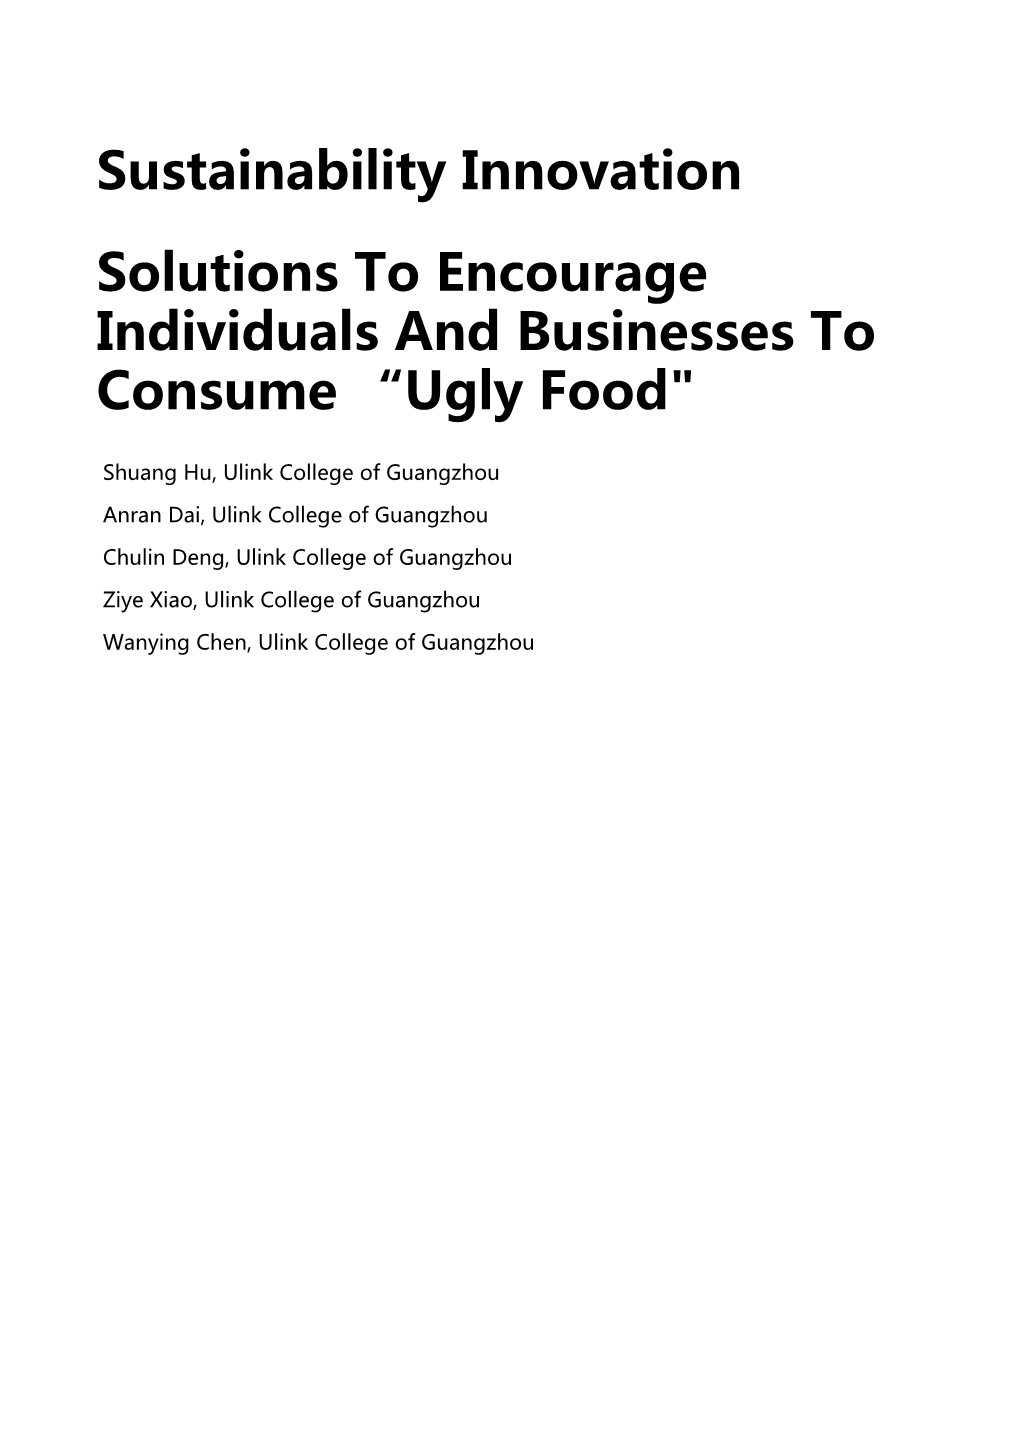 Sustainability Innovation Solutions to Encourage Individuals and Businesses to Consume “Ugly Food"